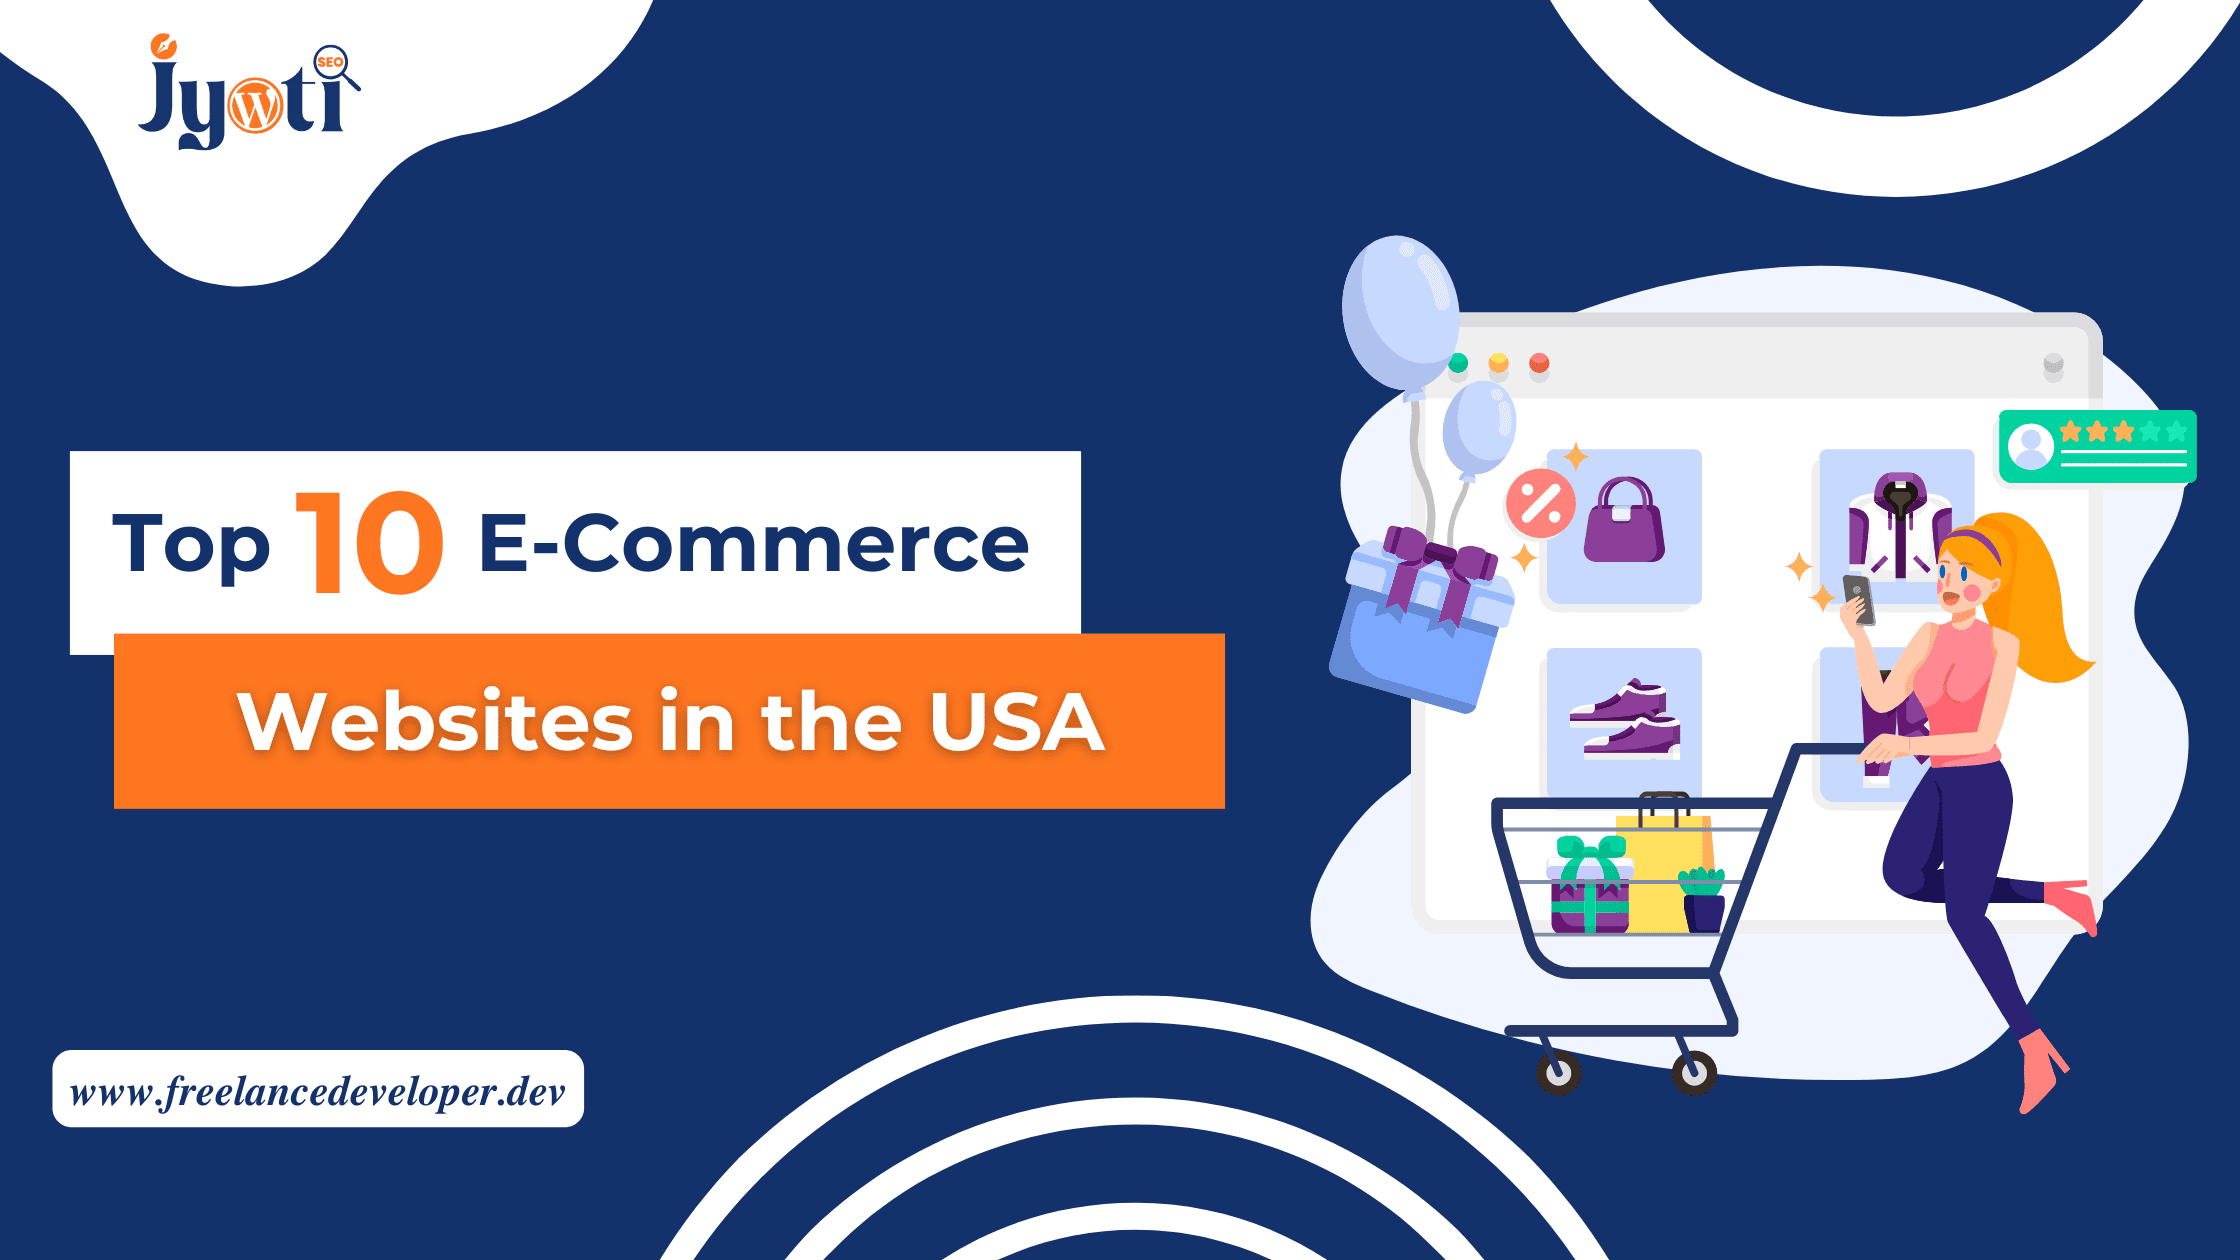 Top 10 E-Commerce Websites in the USA